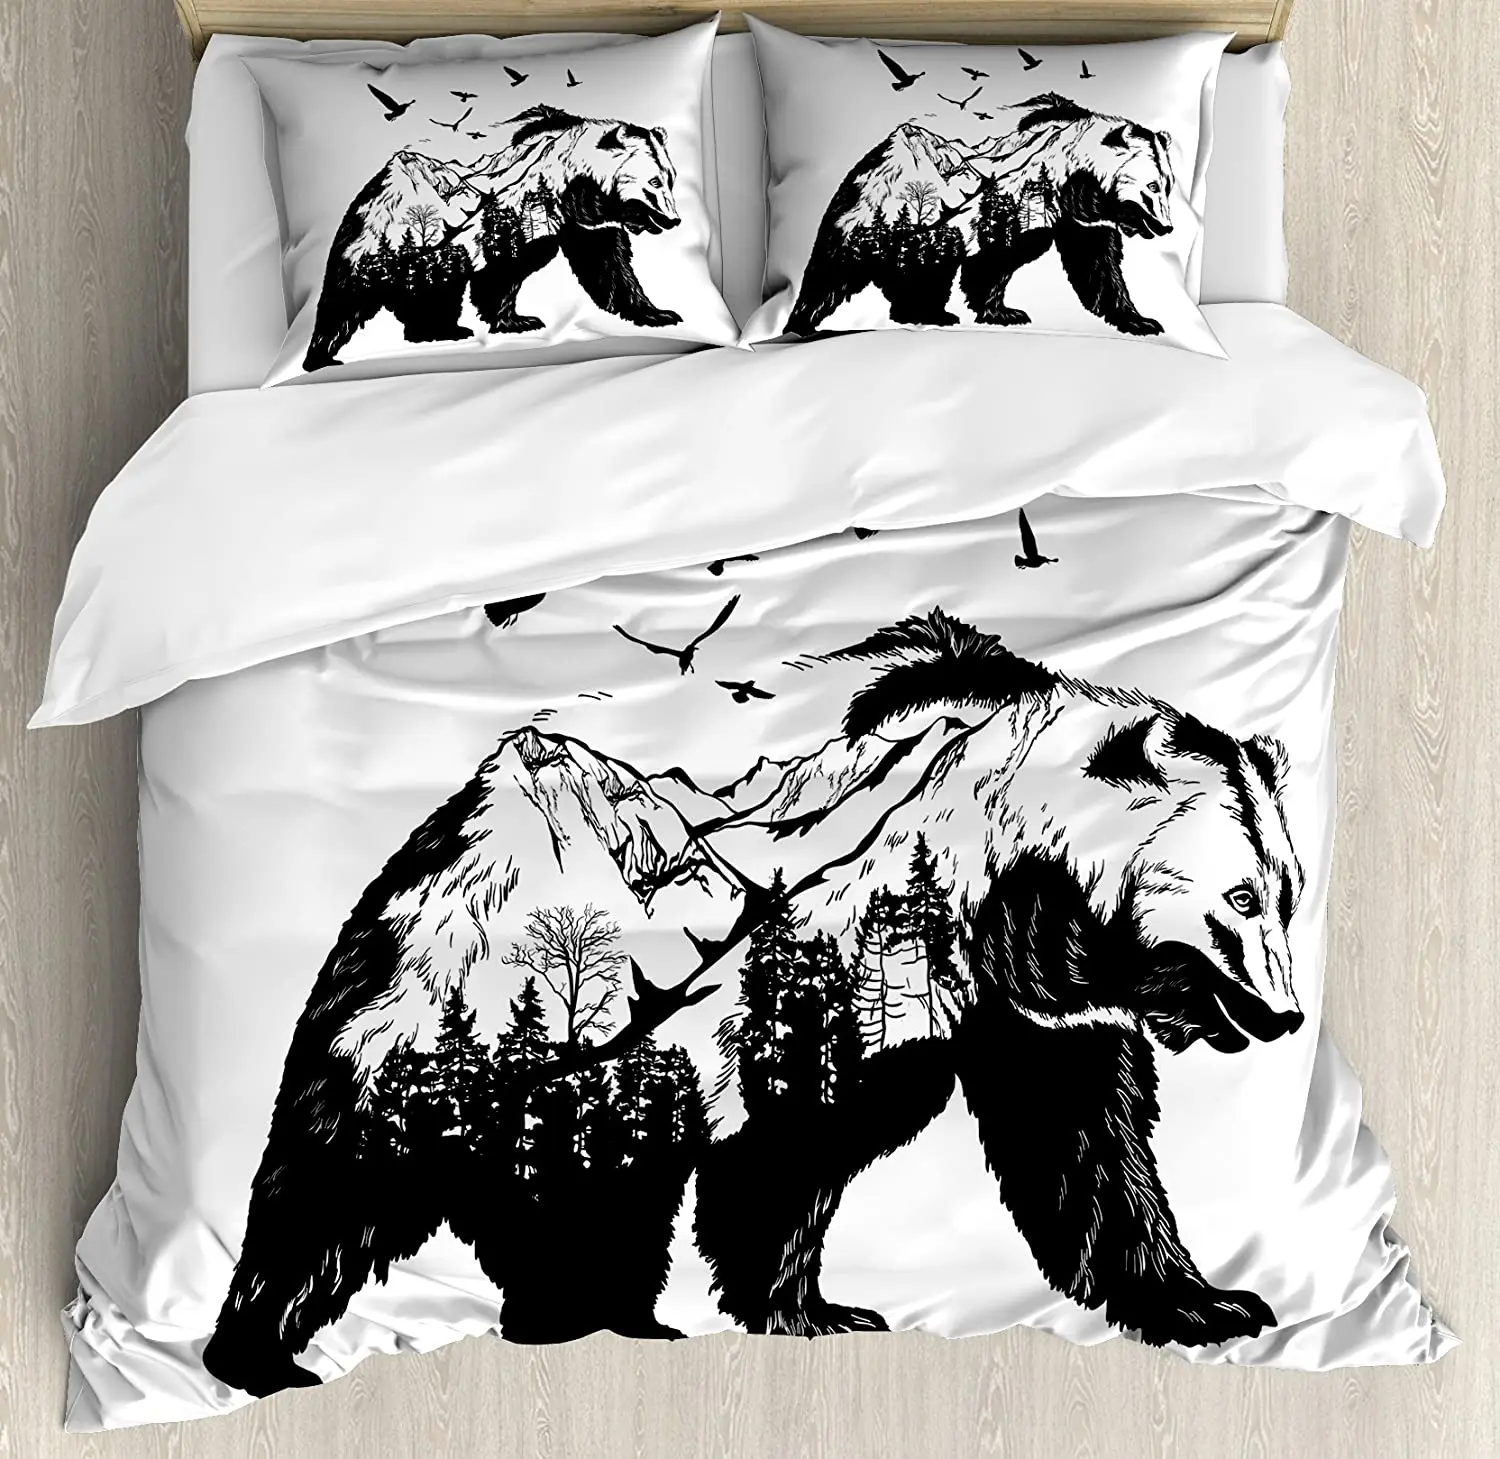 

Bear Bedding Set For Bedroom Bed Home Mammal Silhouette with Mountain Landscape Flying Bir Duvet Cover Quilt Cover Pillowcase